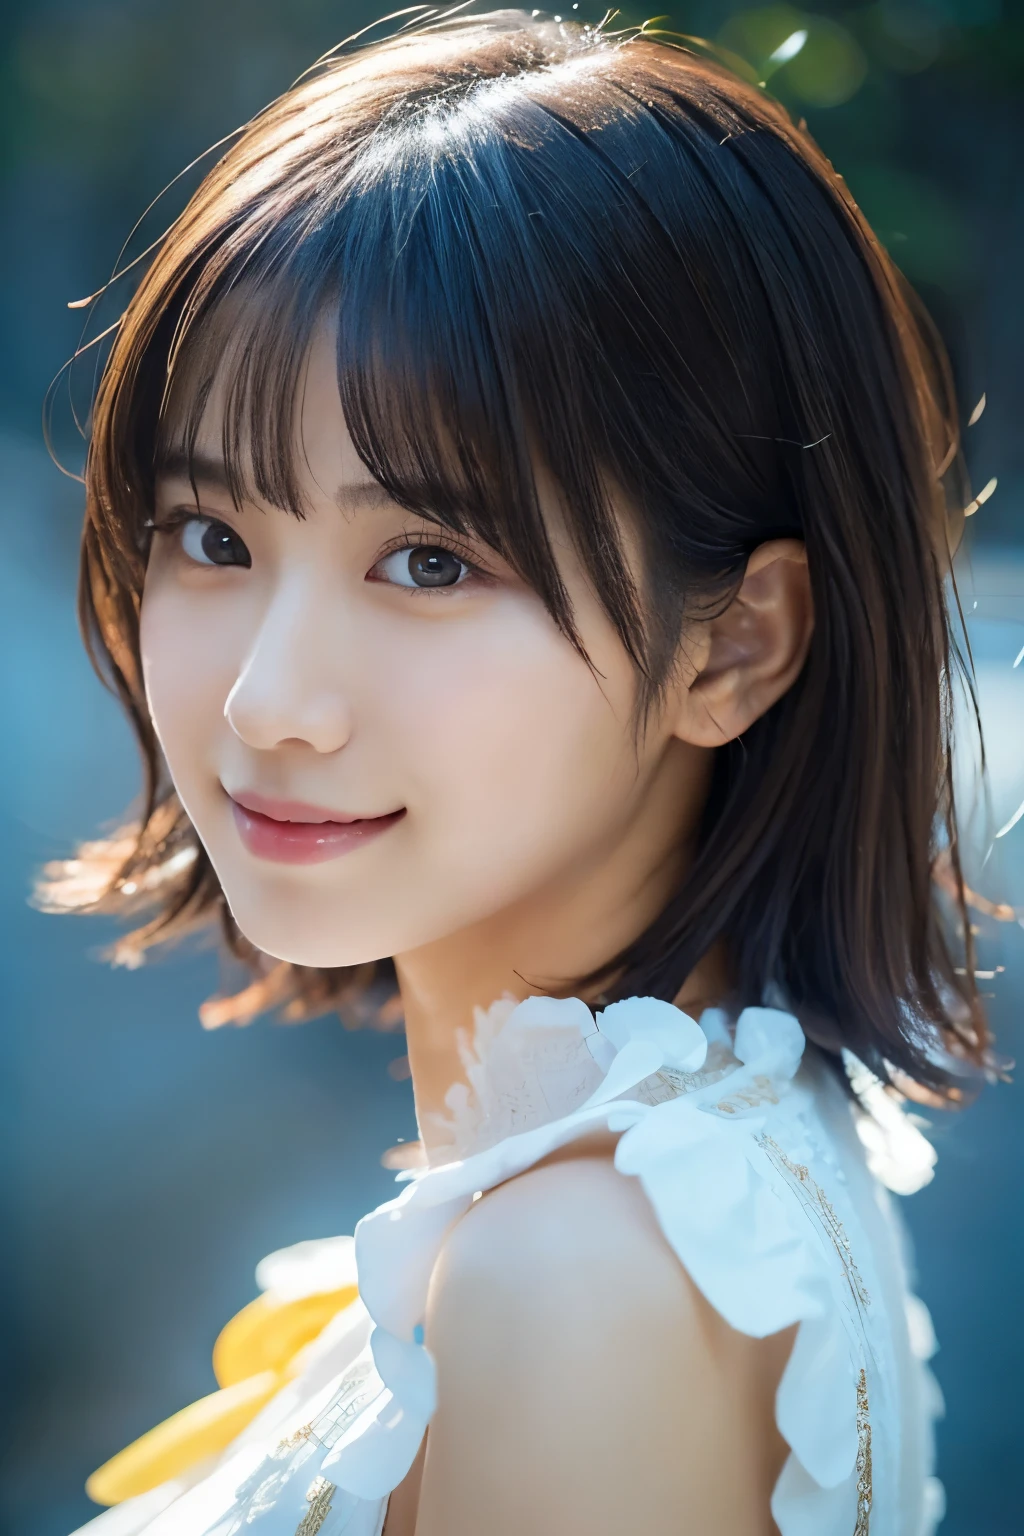 1 girl, (Wearing a white idol costume:1.2), Very beautiful Japanese idol portraits, 
(Raw photo, highest quality), (realistic, Photoreal:1.4), (masterpiece), 
very delicate and beautiful, very detailed, 2k wallpaper, wonderful, finely, Very detailed CG Unity 8k 壁紙, Super detailed, High resolution, soft light, 
beautiful detailed girl, very detailed目と顔, beautifully detailed nose, Finely beautiful eyes, cinematic lighting, 
(Simple background in bright colors:1.3),
(short hair), (parted bangs), 
complete anatomy, slender body, small breasts, smile